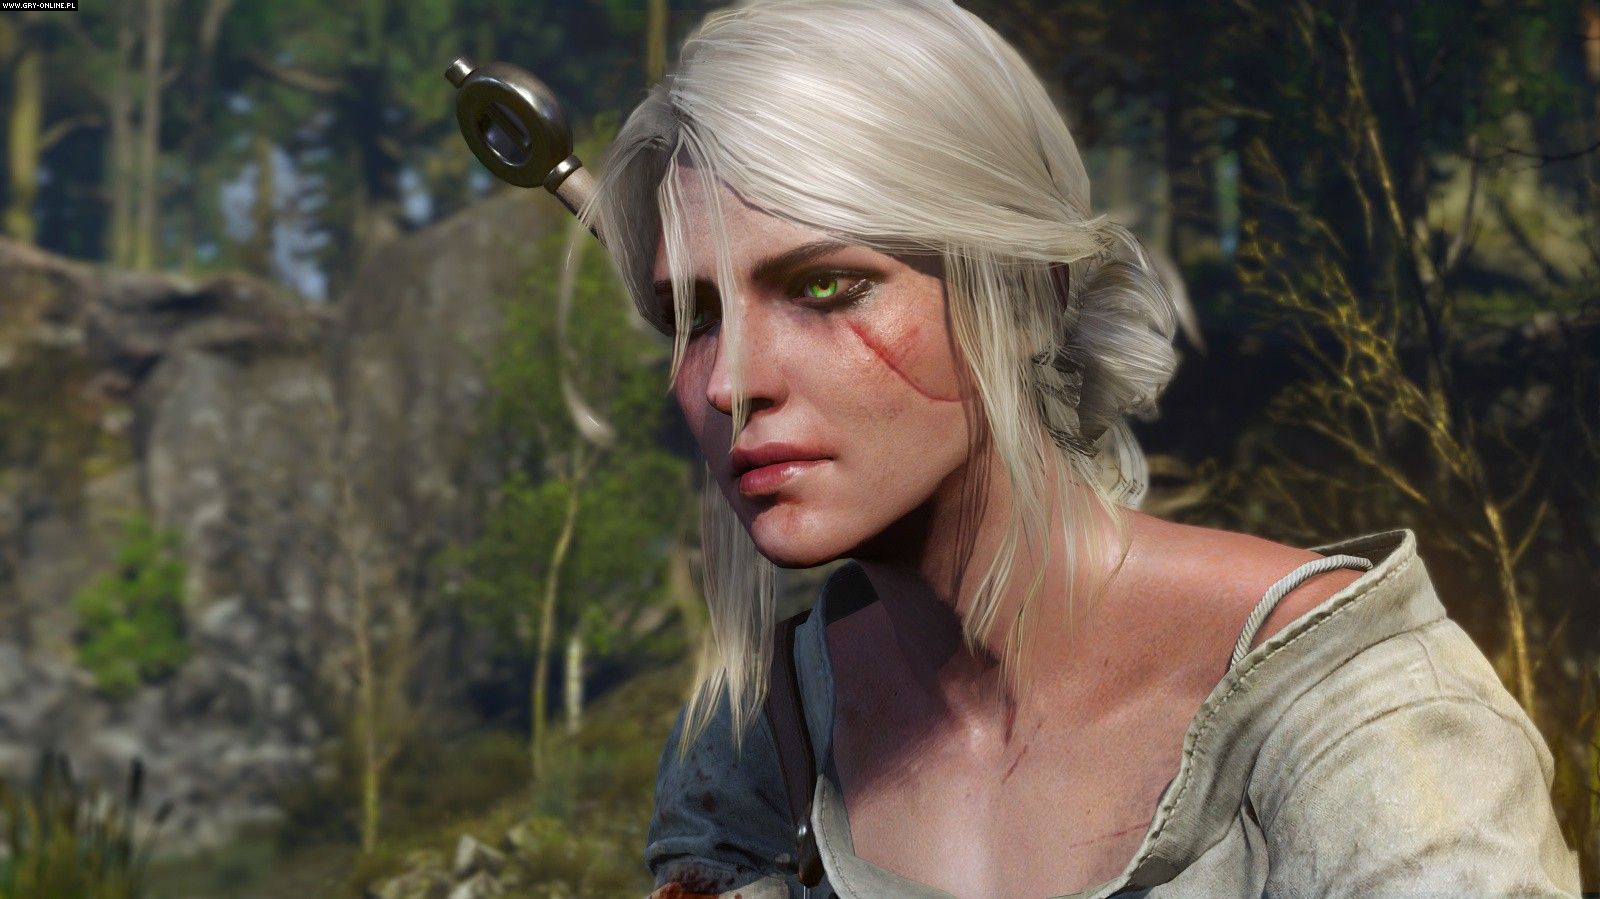 We can guess that Witcher 3 is the most influential video game of 2015.